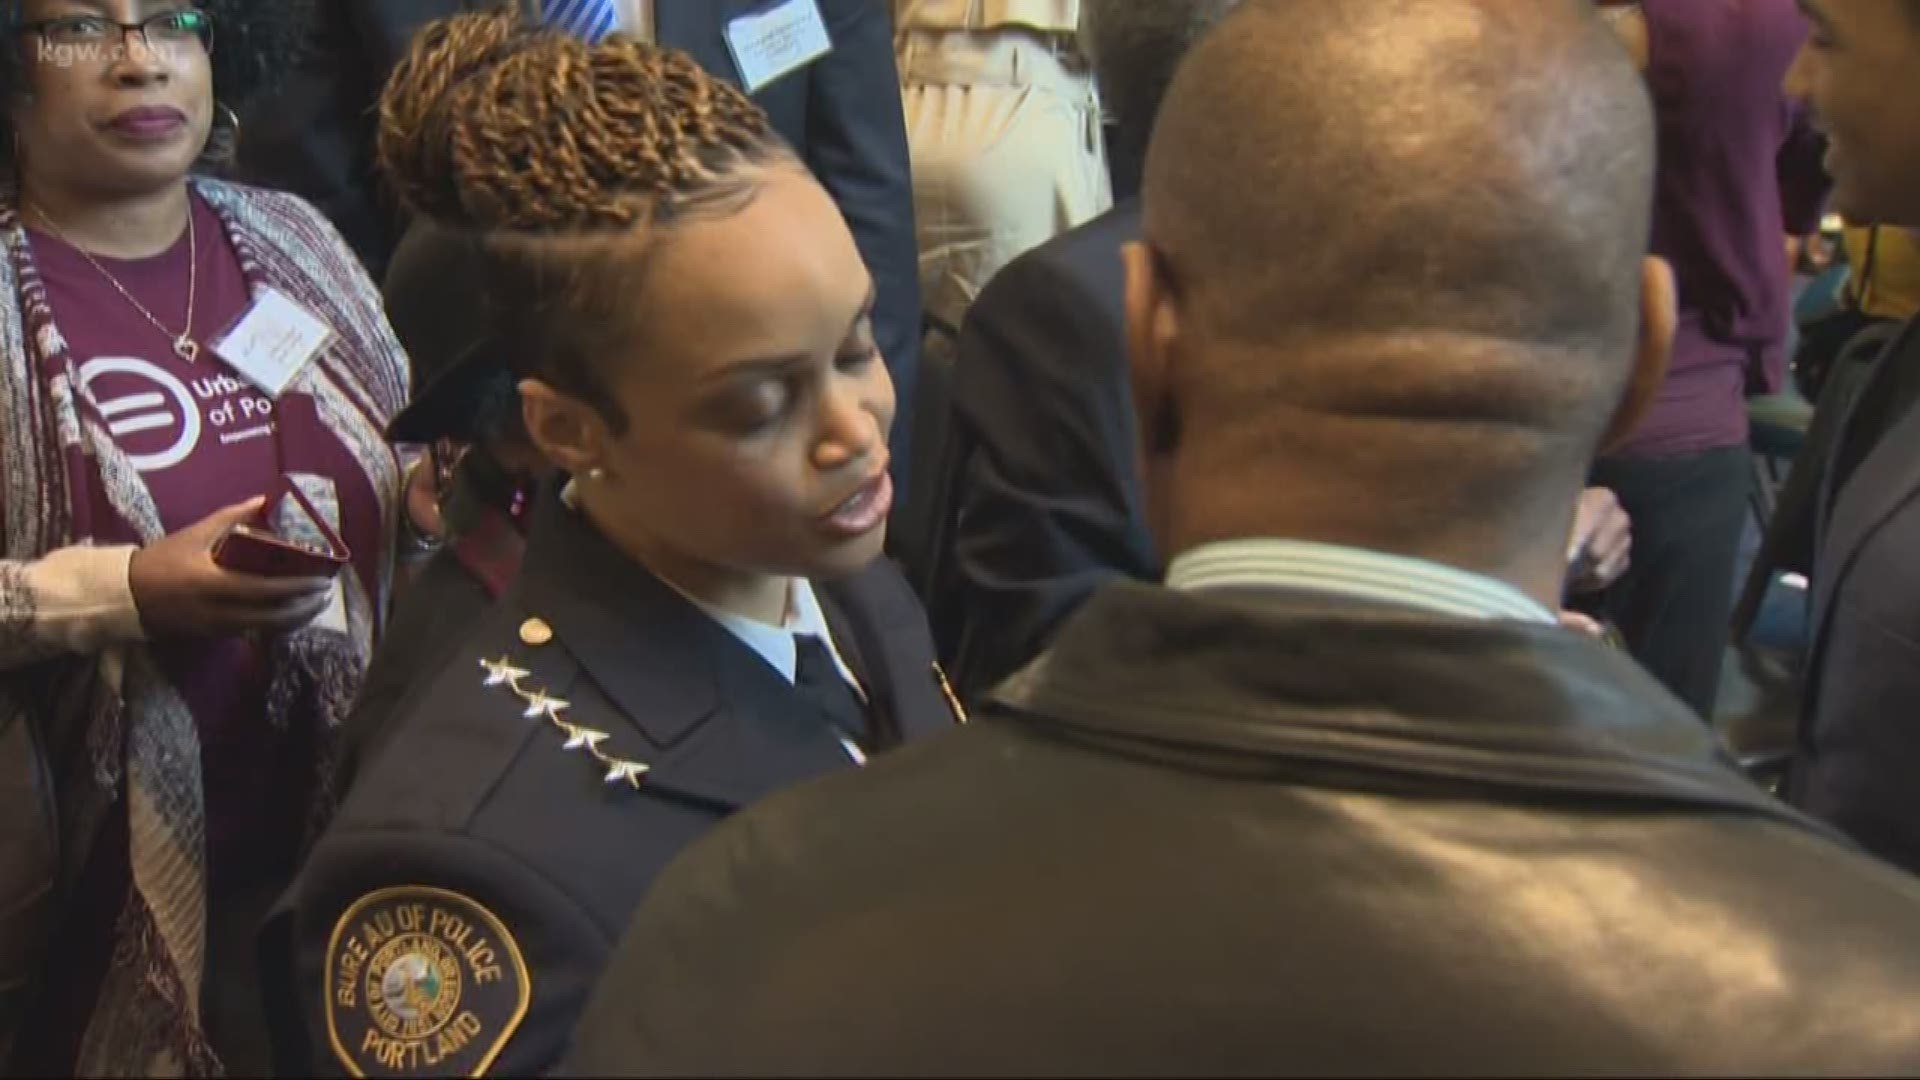 Danielle Outlaw serves as Portland's Police Bureau chief for just two years but she has many years of service in law enforcement.